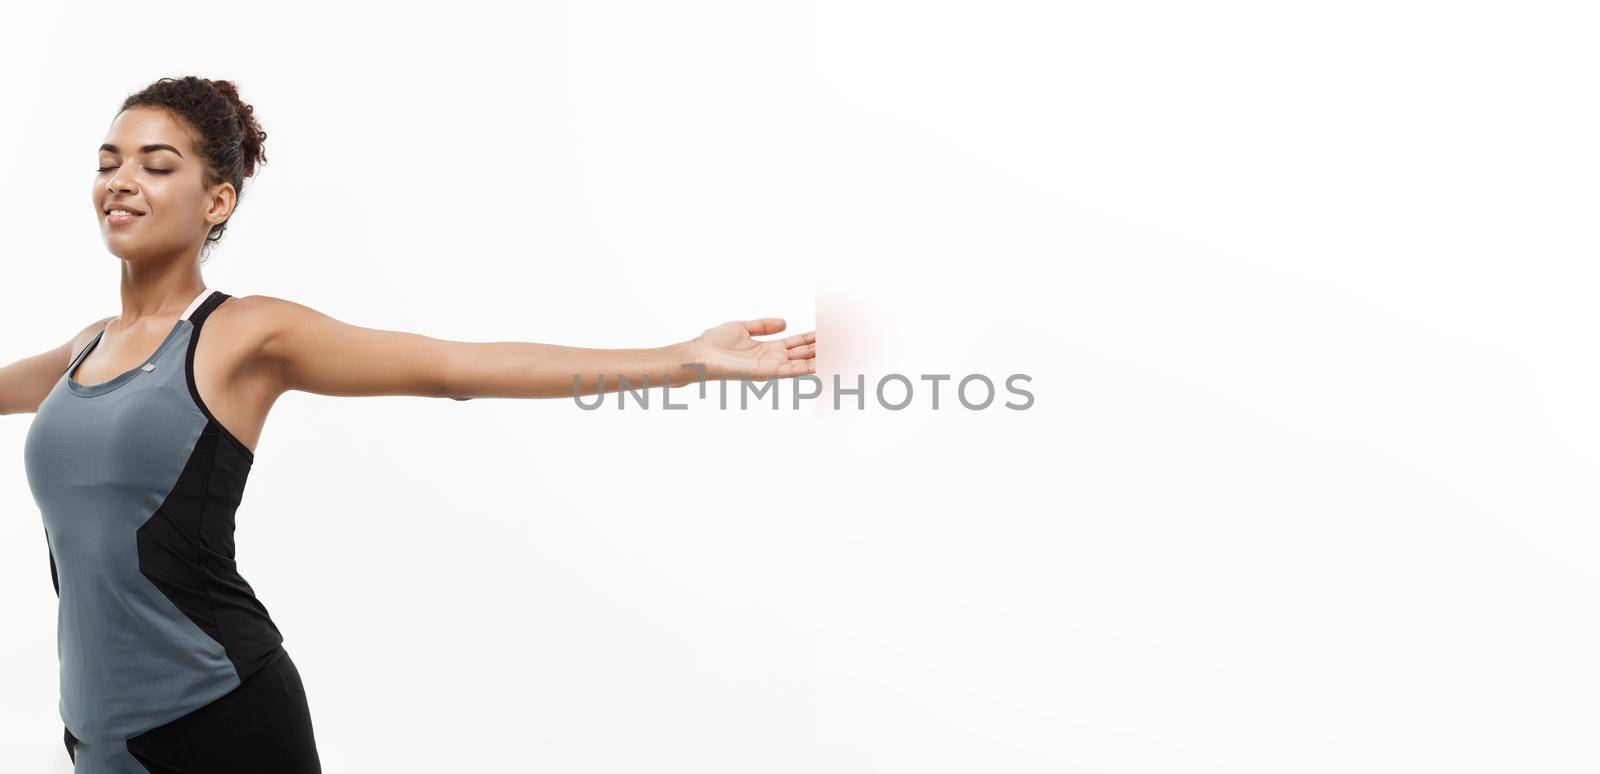 Healthy and Fitness concept - Portrait of young beautiful African American with her hands outstretched and closing eyes feeling relax. Isolated on white studio background